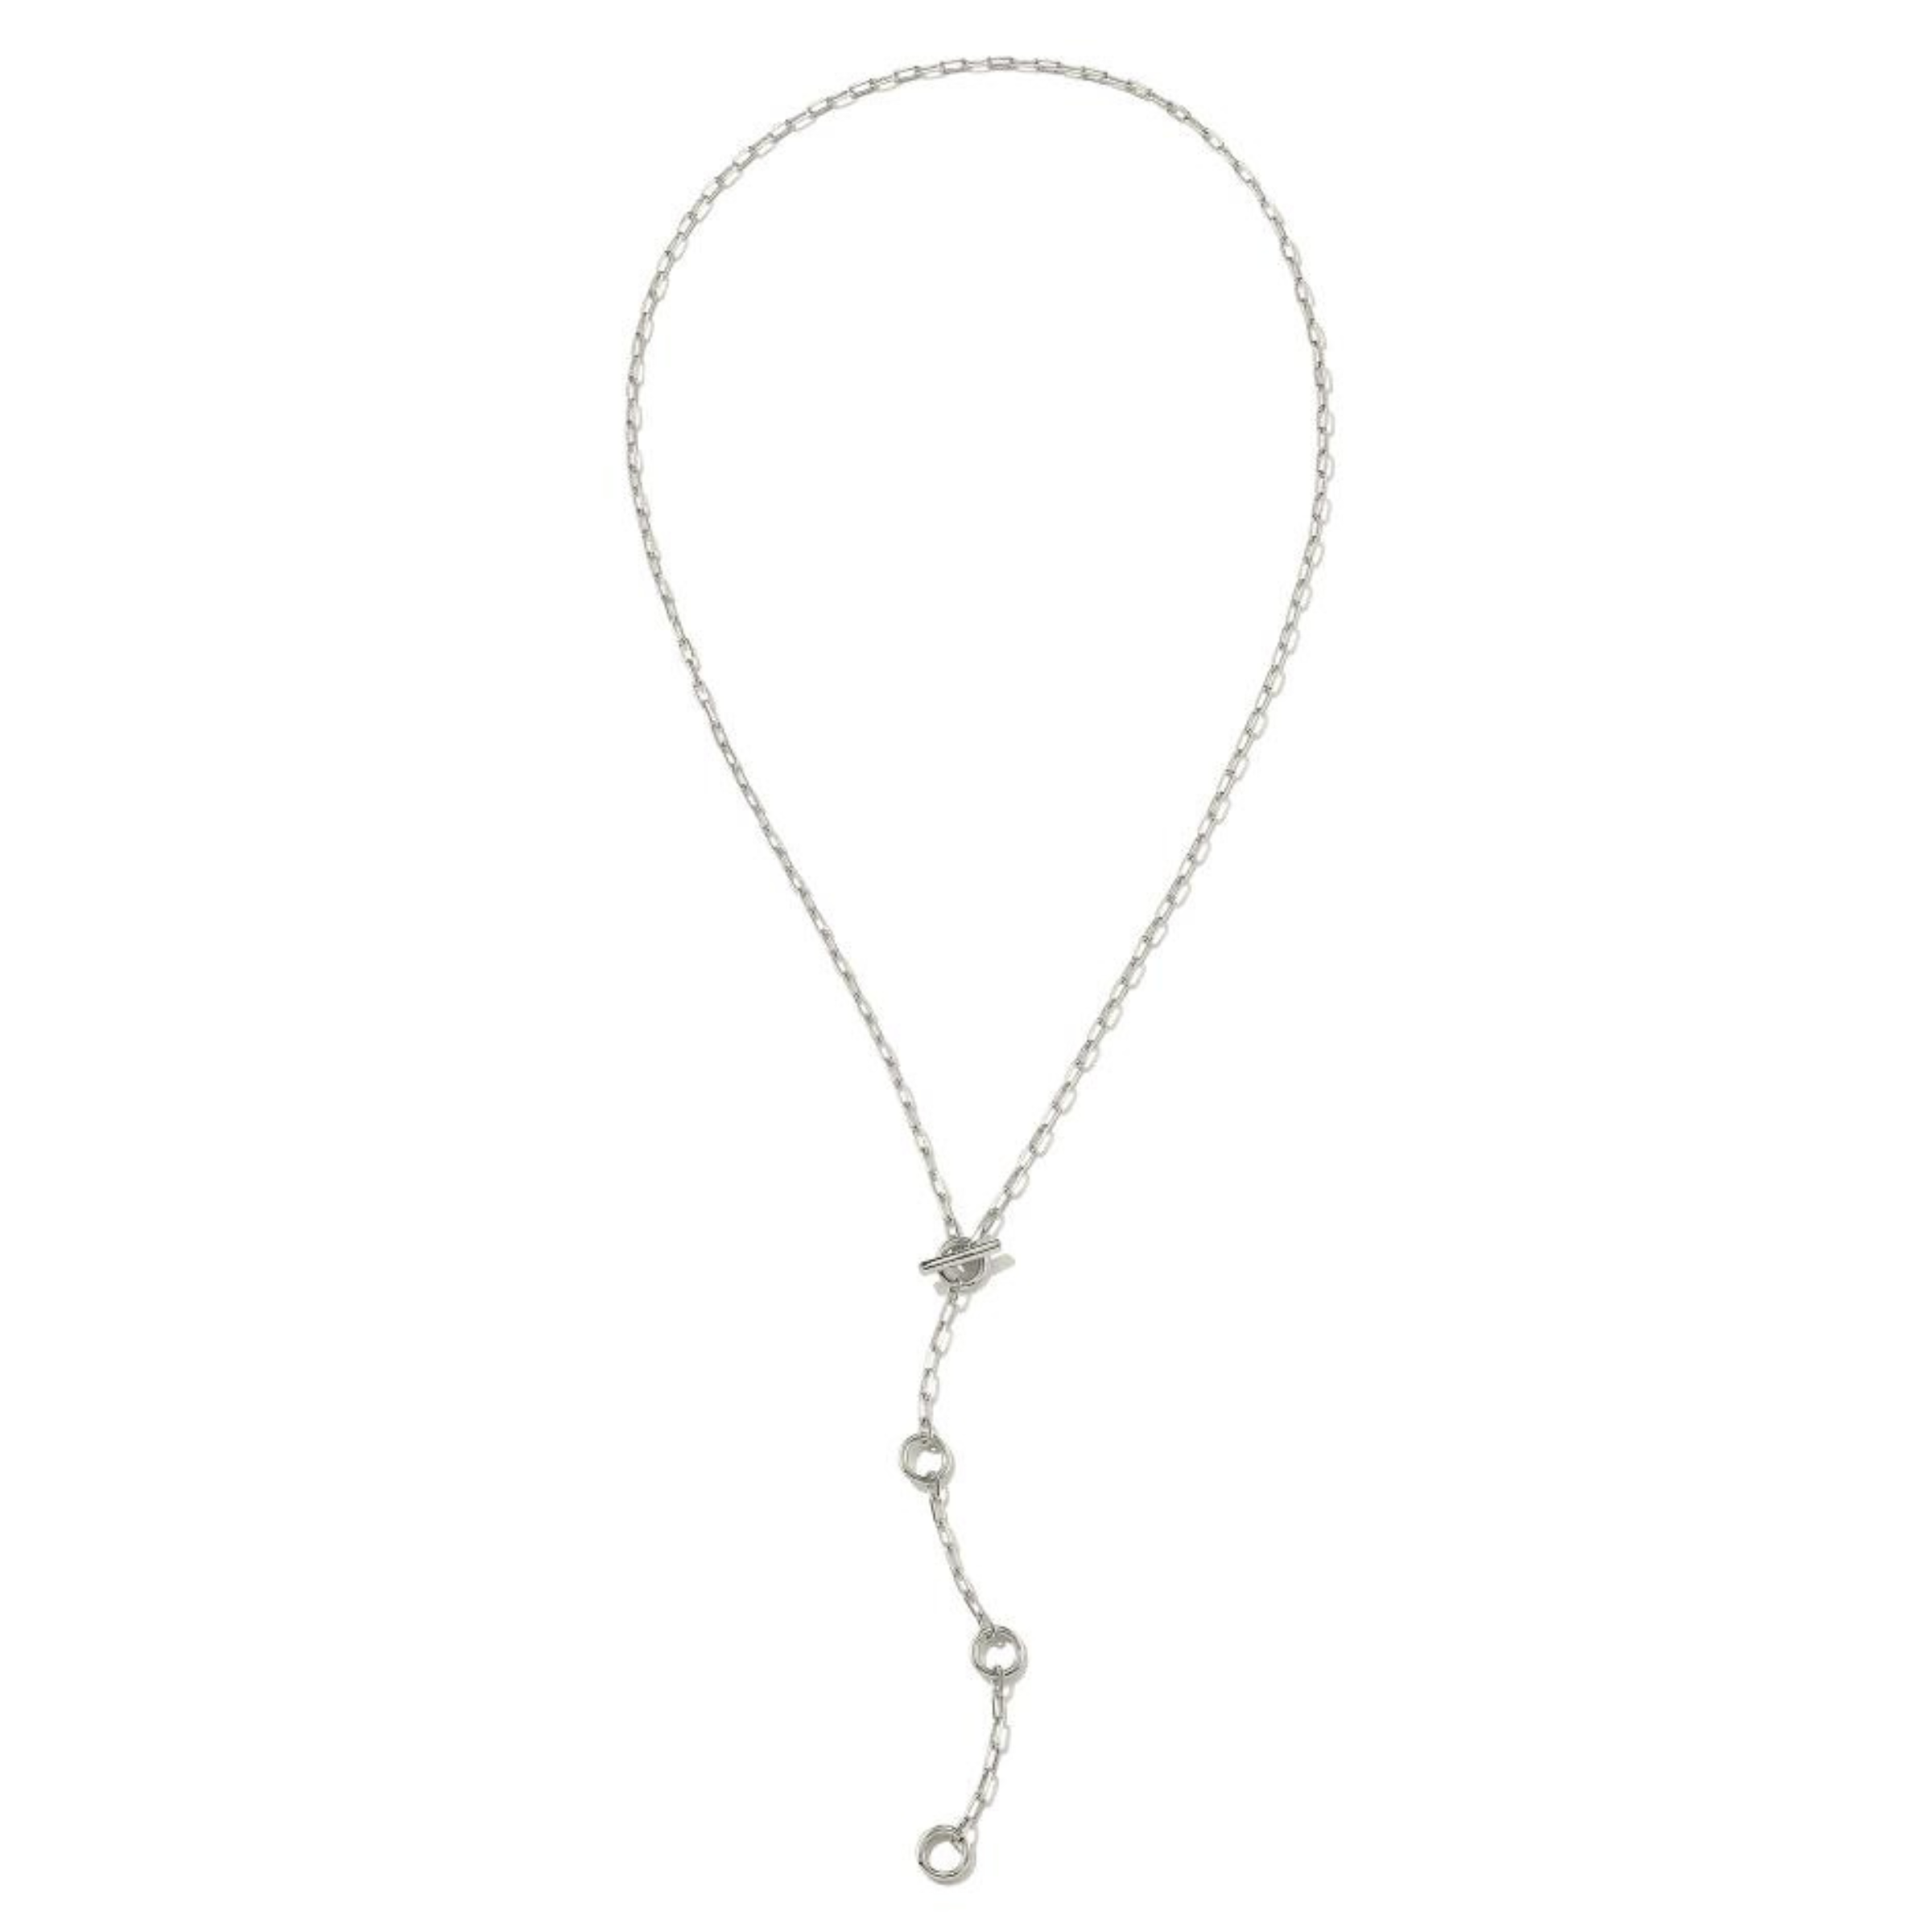 Kendra Scott | Andi Y Necklace in Silver - Giddy Up Glamour Boutique